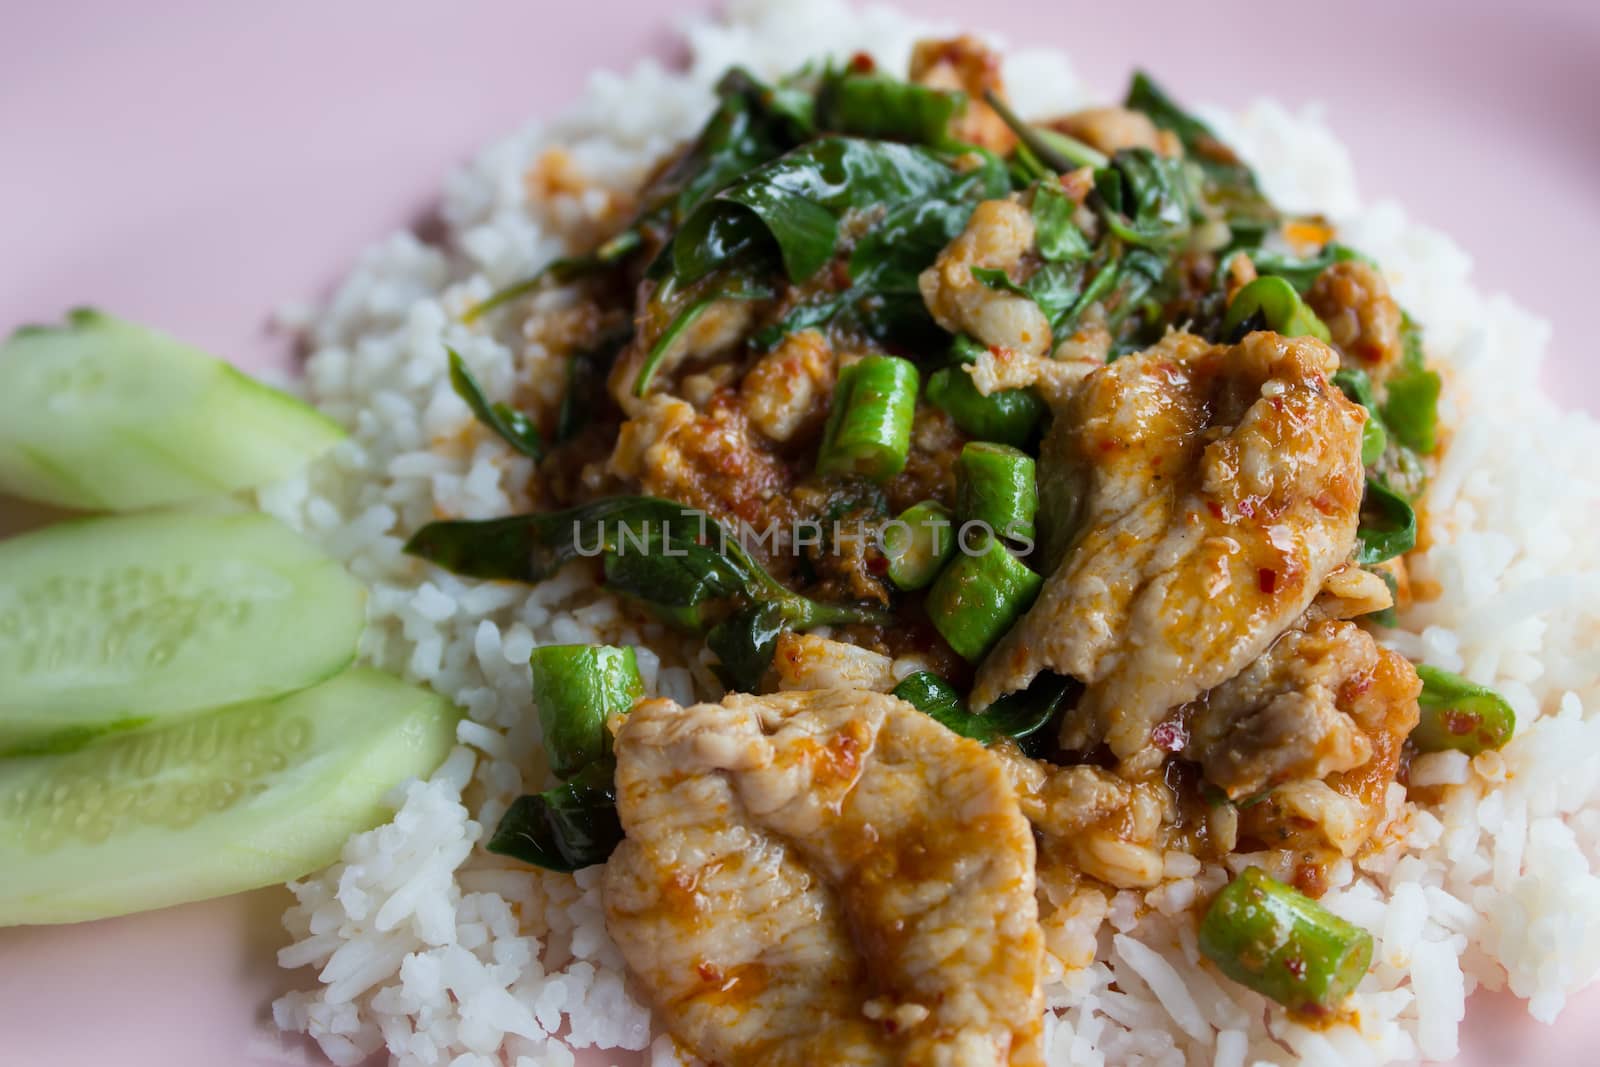 Stir fried pork and curry paste by vitawin